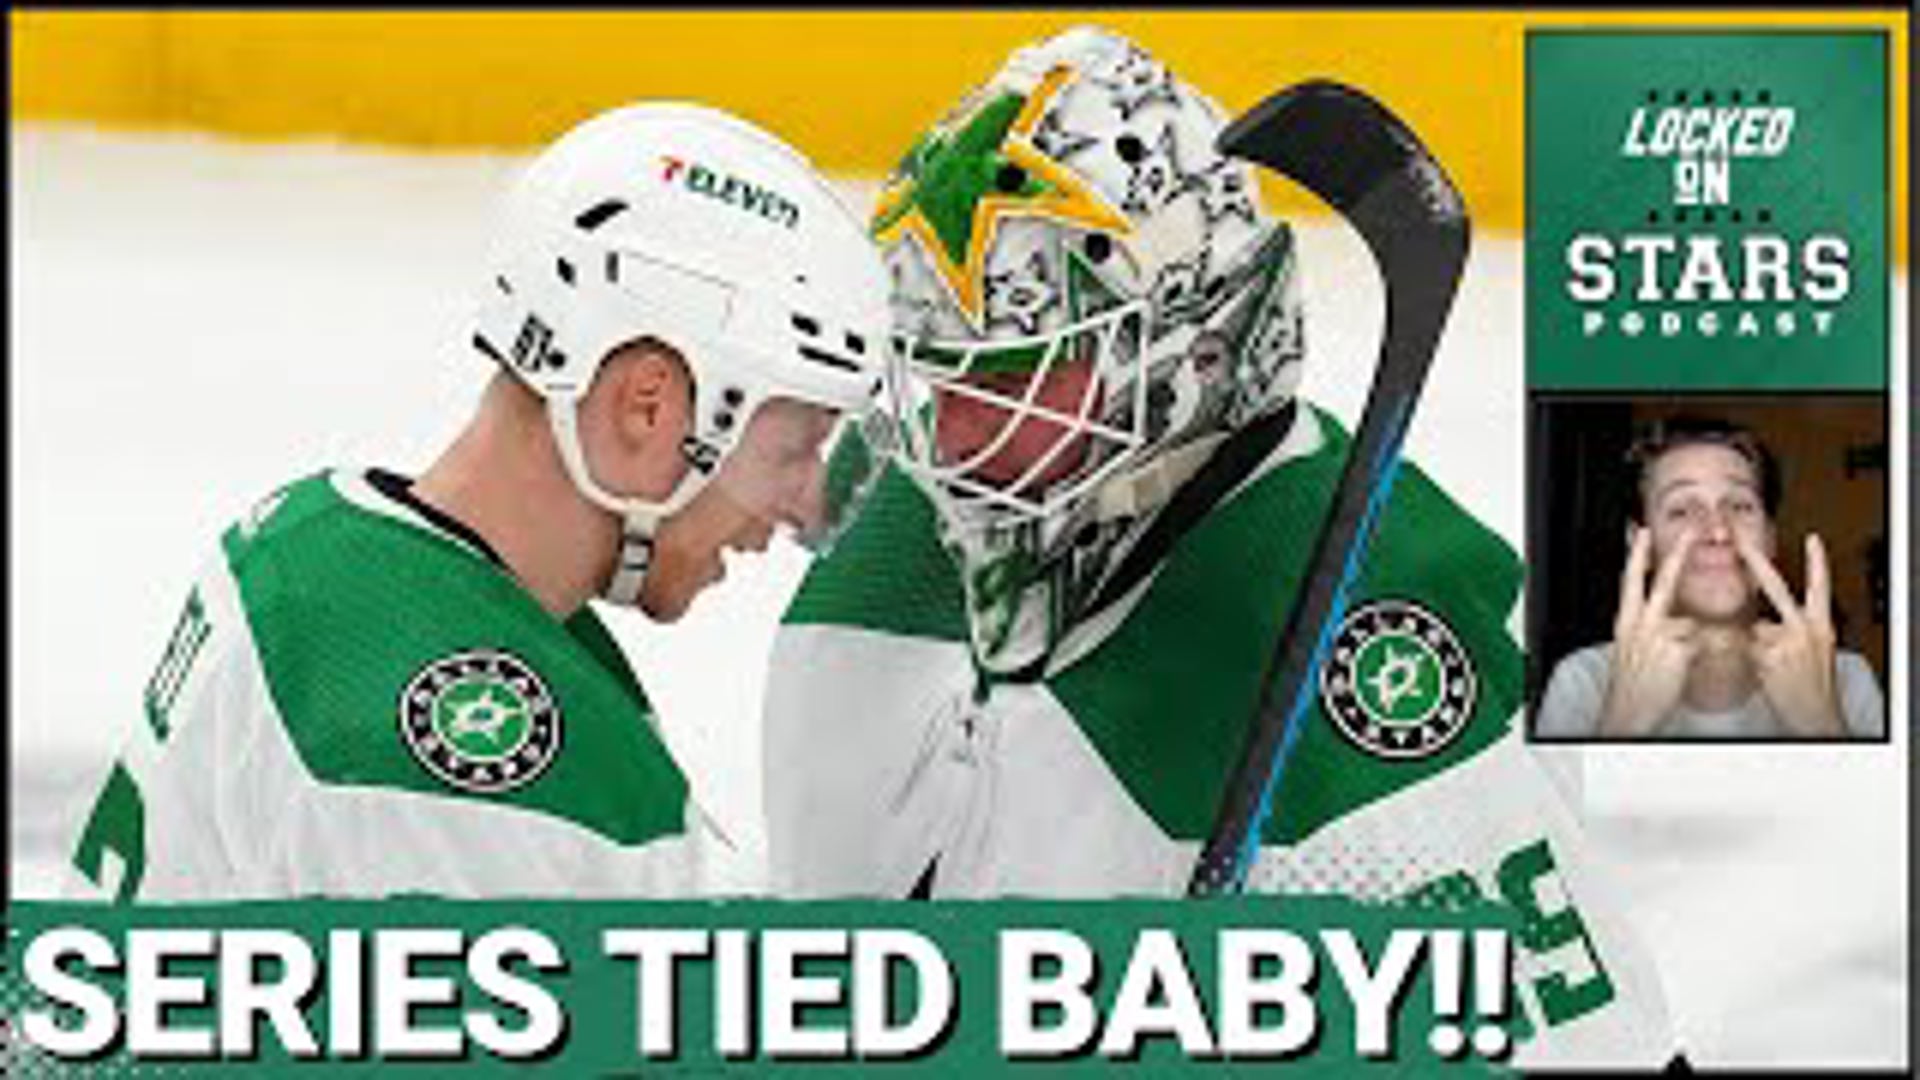 The Dallas Stars pull out a gritty 4-2 win over the Vegas Golden Knights in game four and tie the series at two games a piece heading back to Dallas.